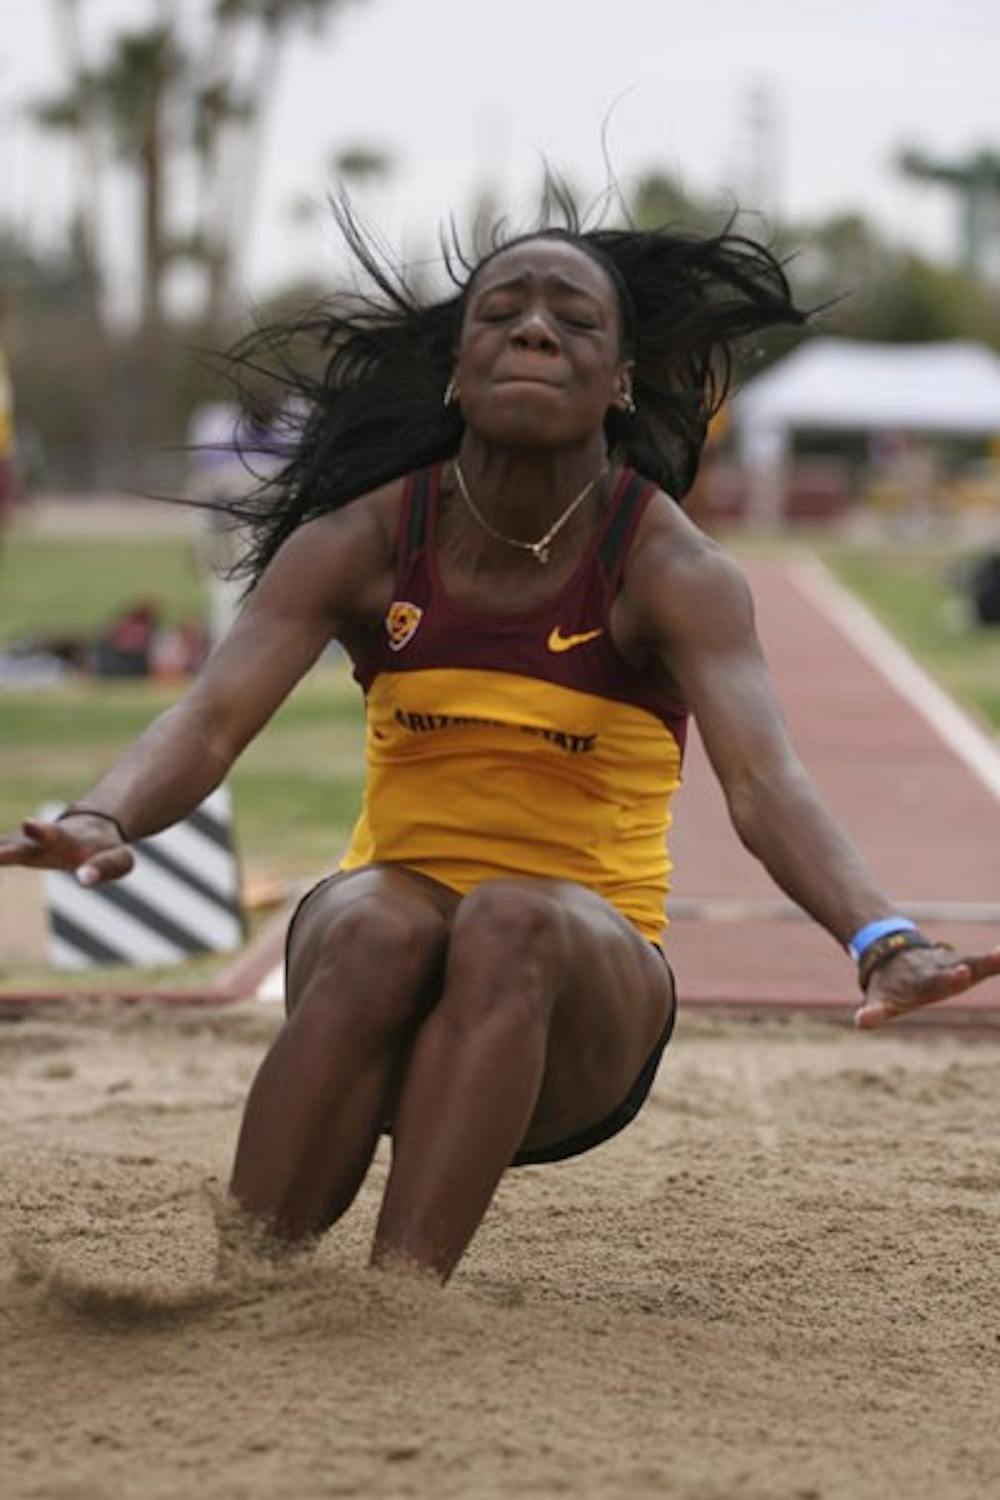 Senior multi-event specialist Christabel Nettey sprays some sand as she lands in the long jump on Feb. 17, 2012. Nettey stepped up after senior Keia Pinnick went down with a minor injury and led the women to a second place finish. (Photo by Samuel Rosenbaum)